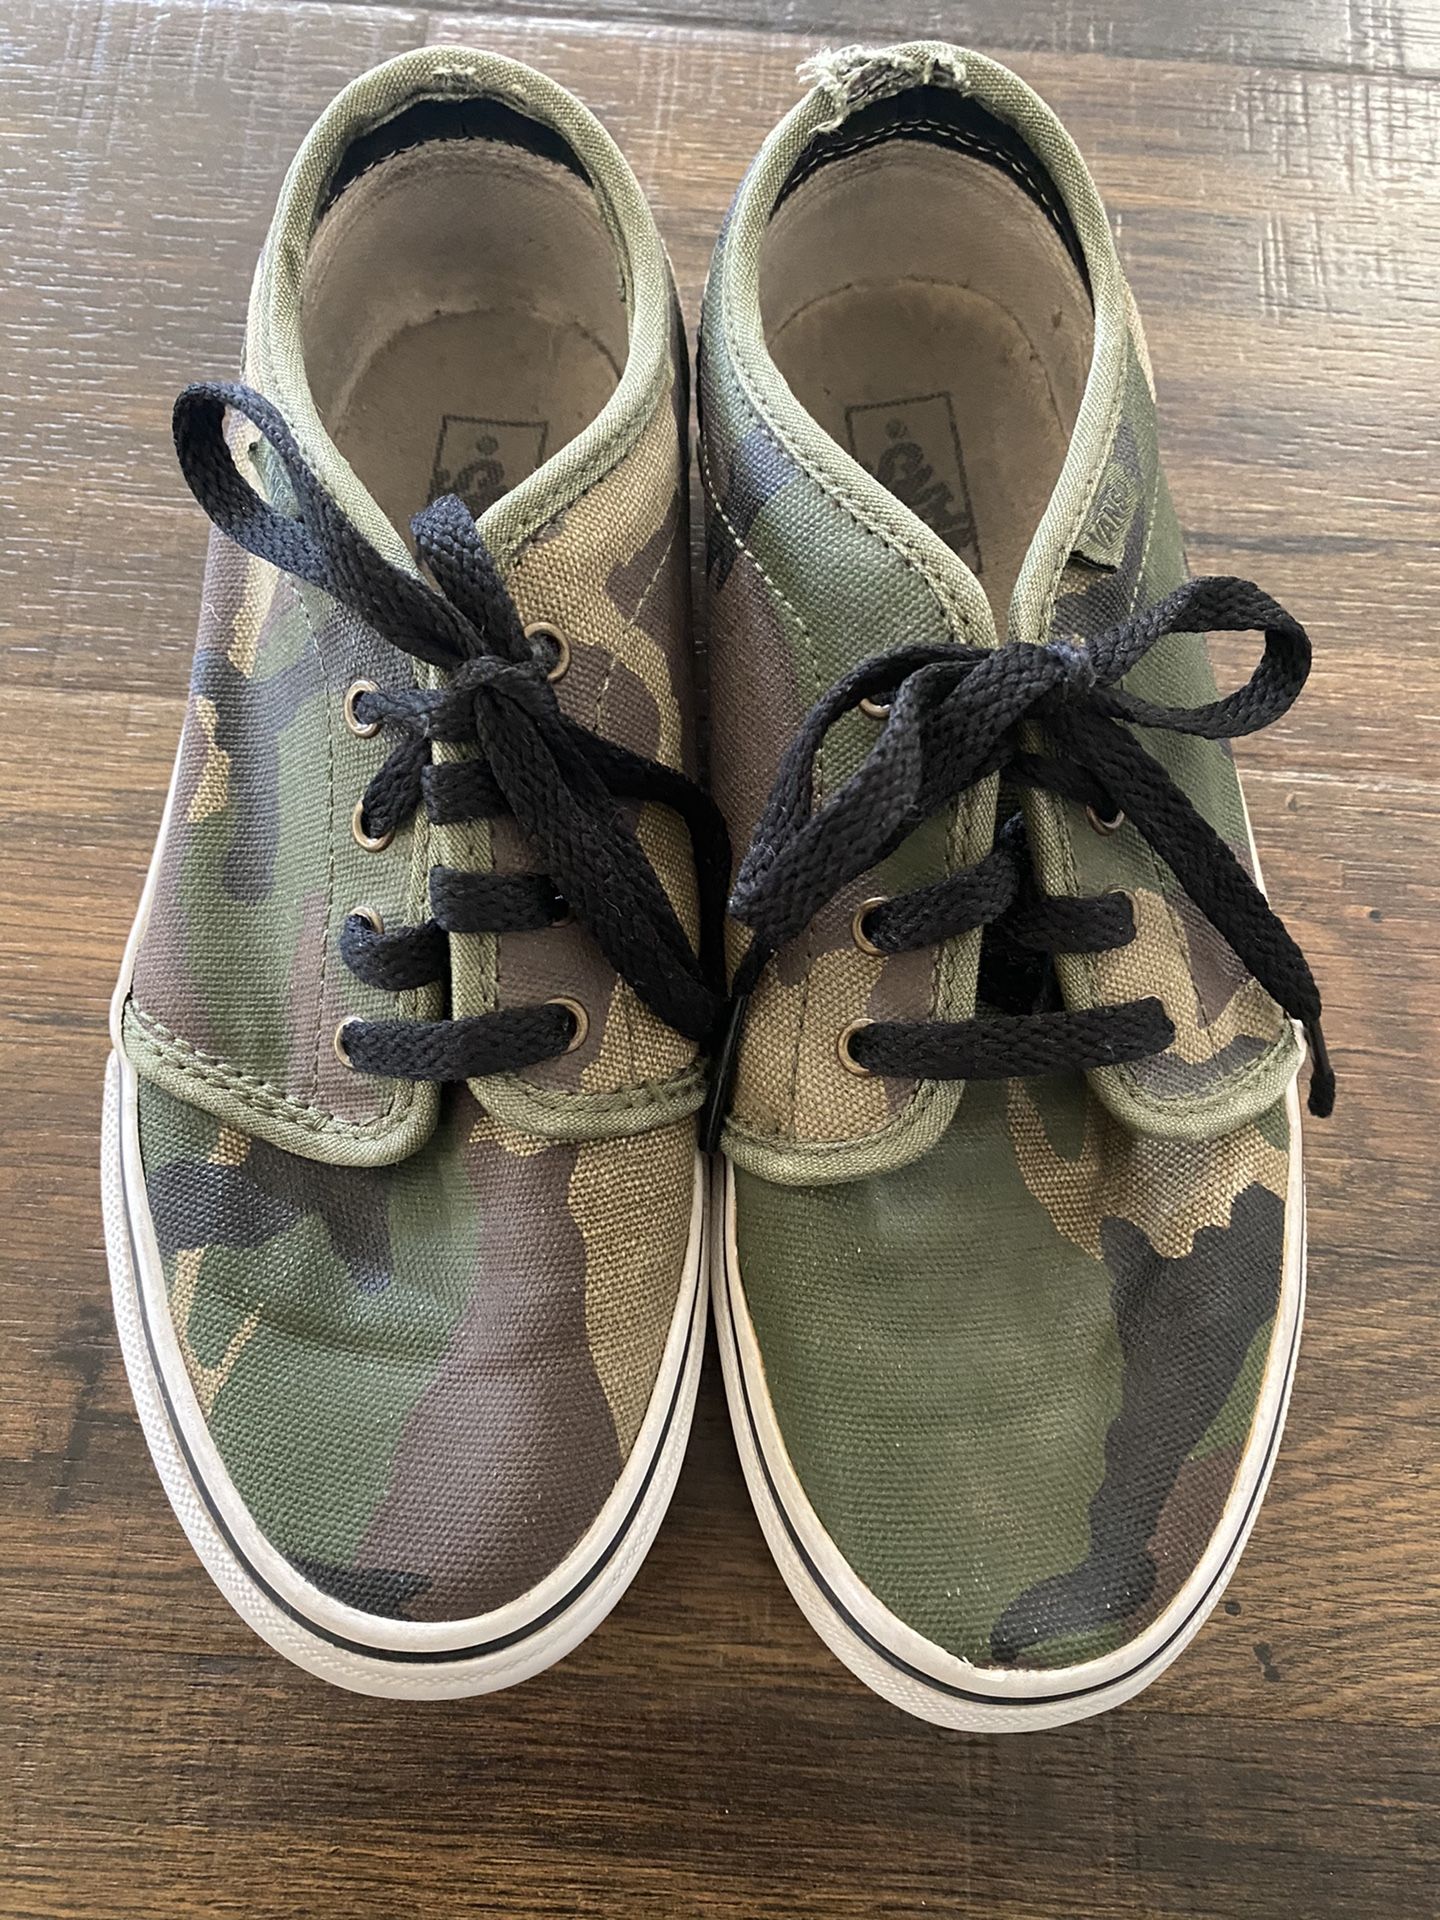 Vans Camo Green Size Youth 3